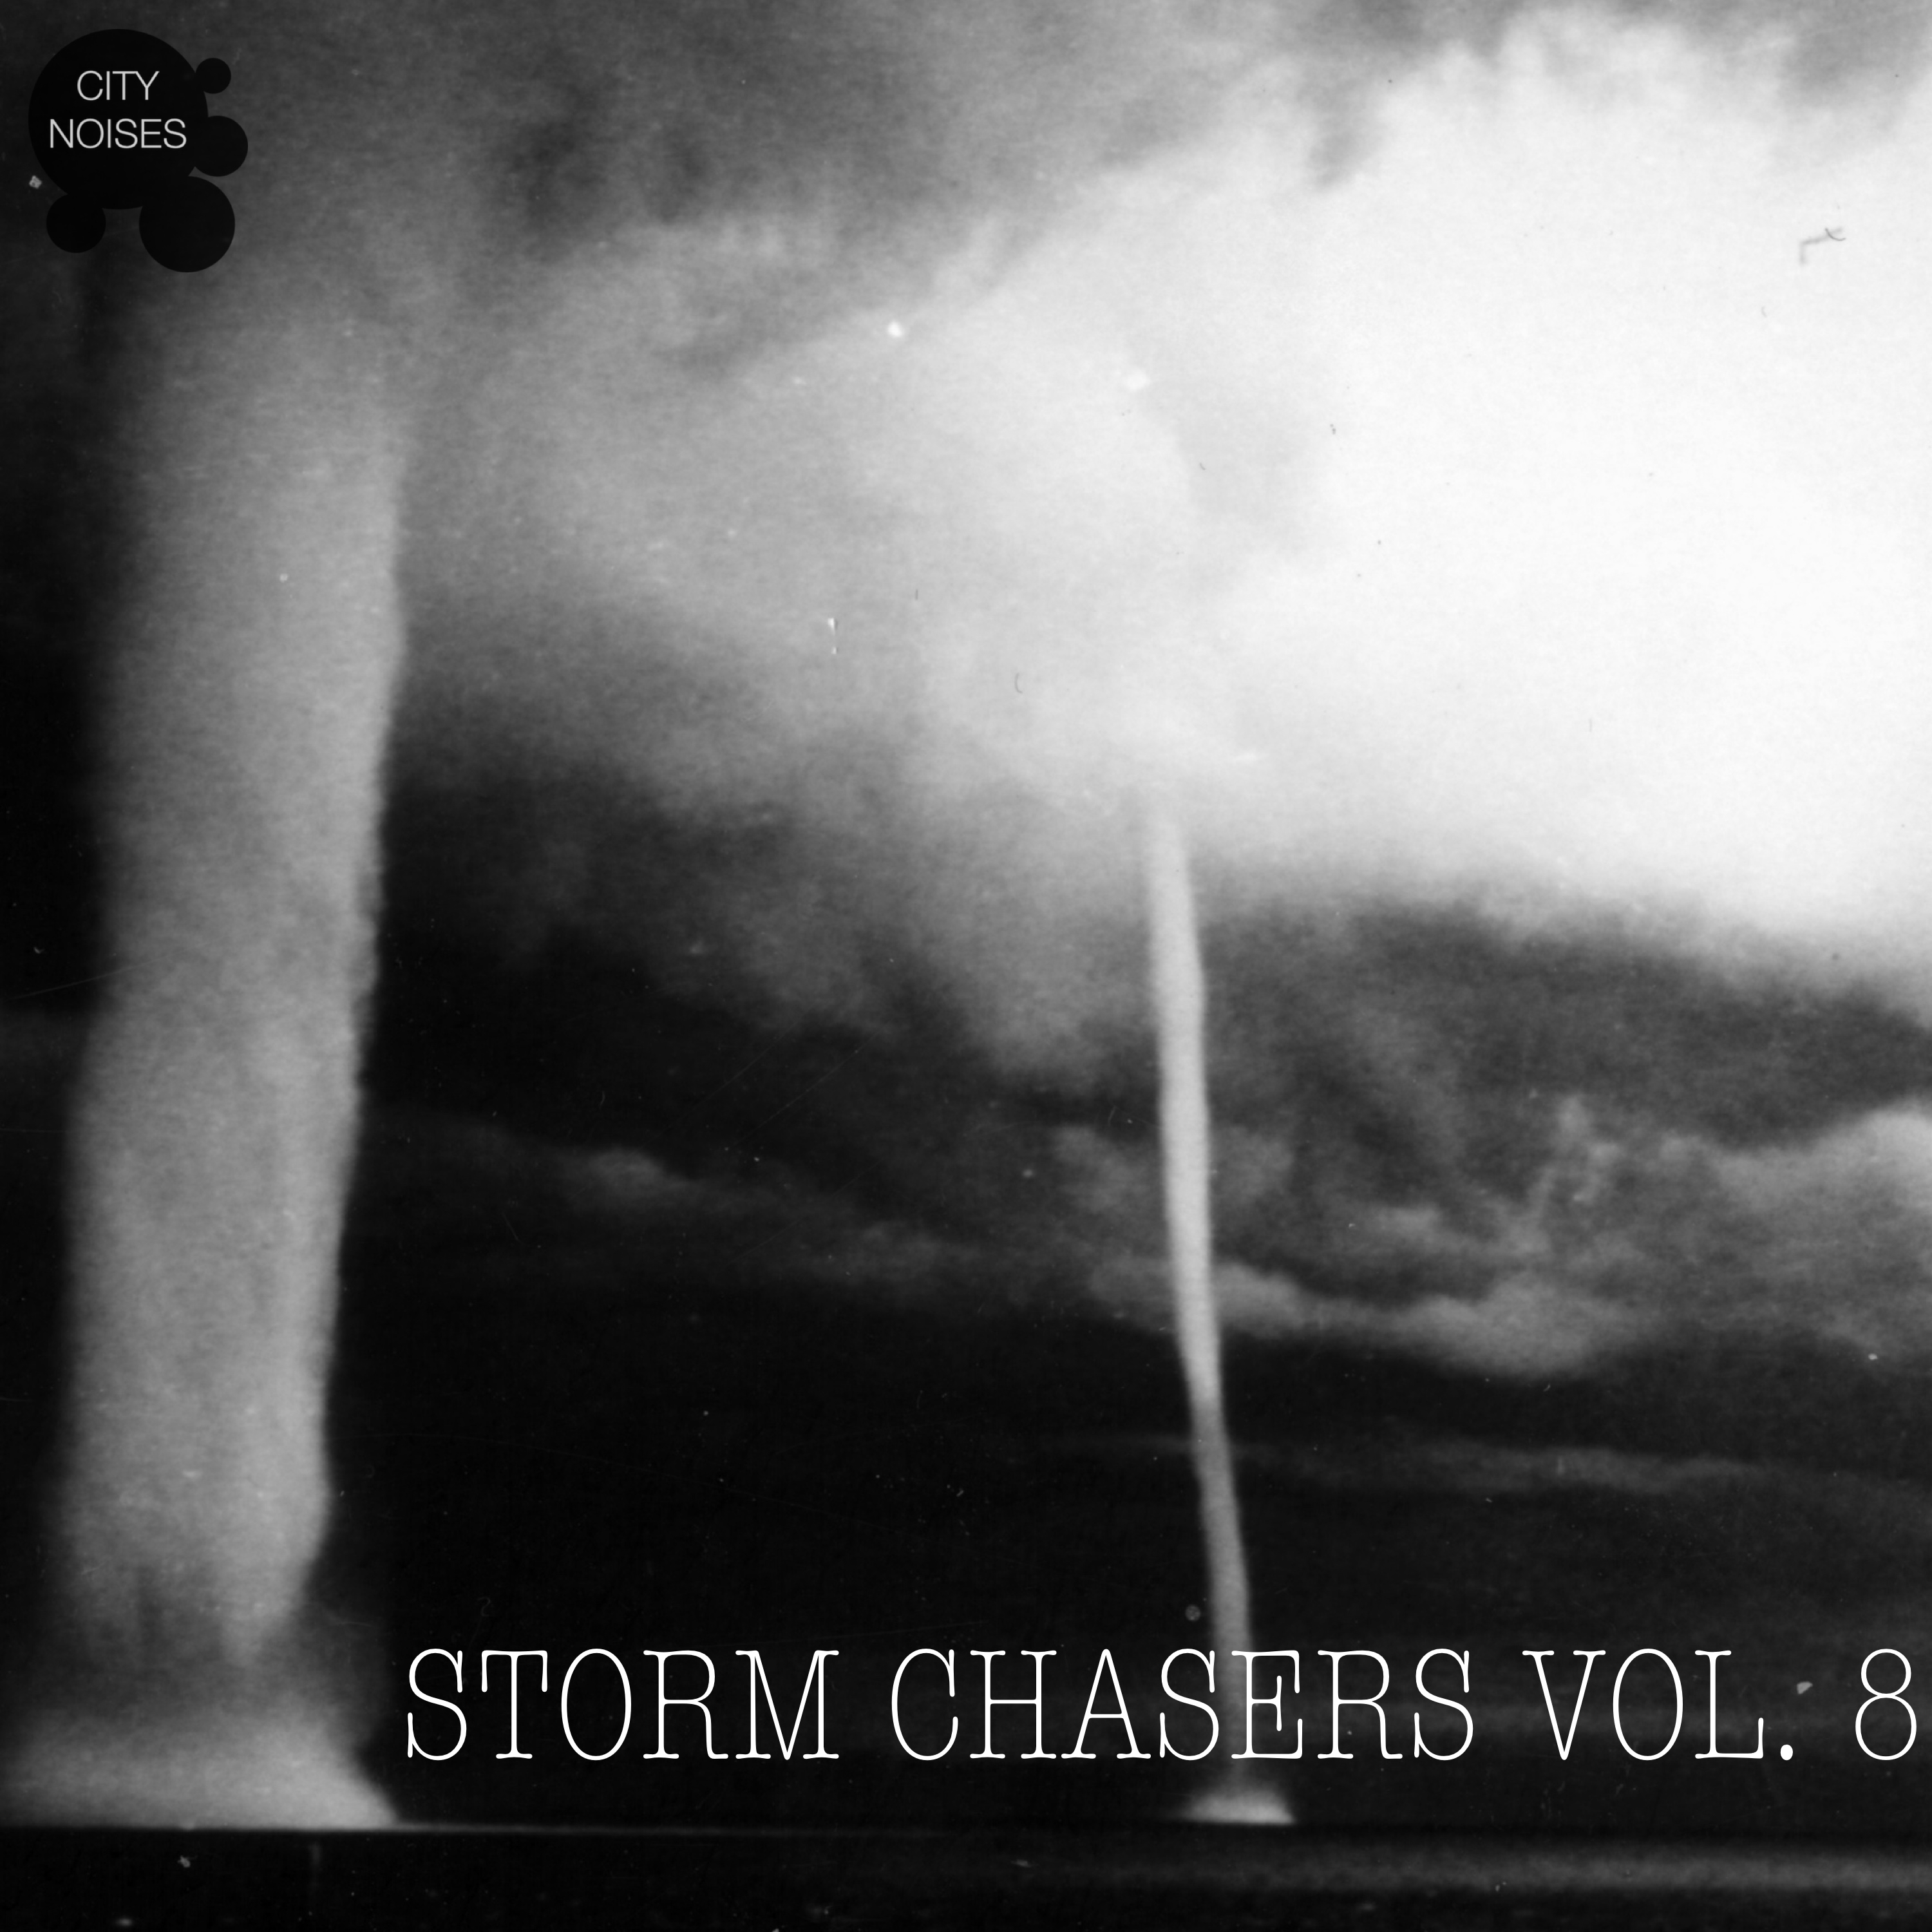 Storm Chasers, Vol. 8